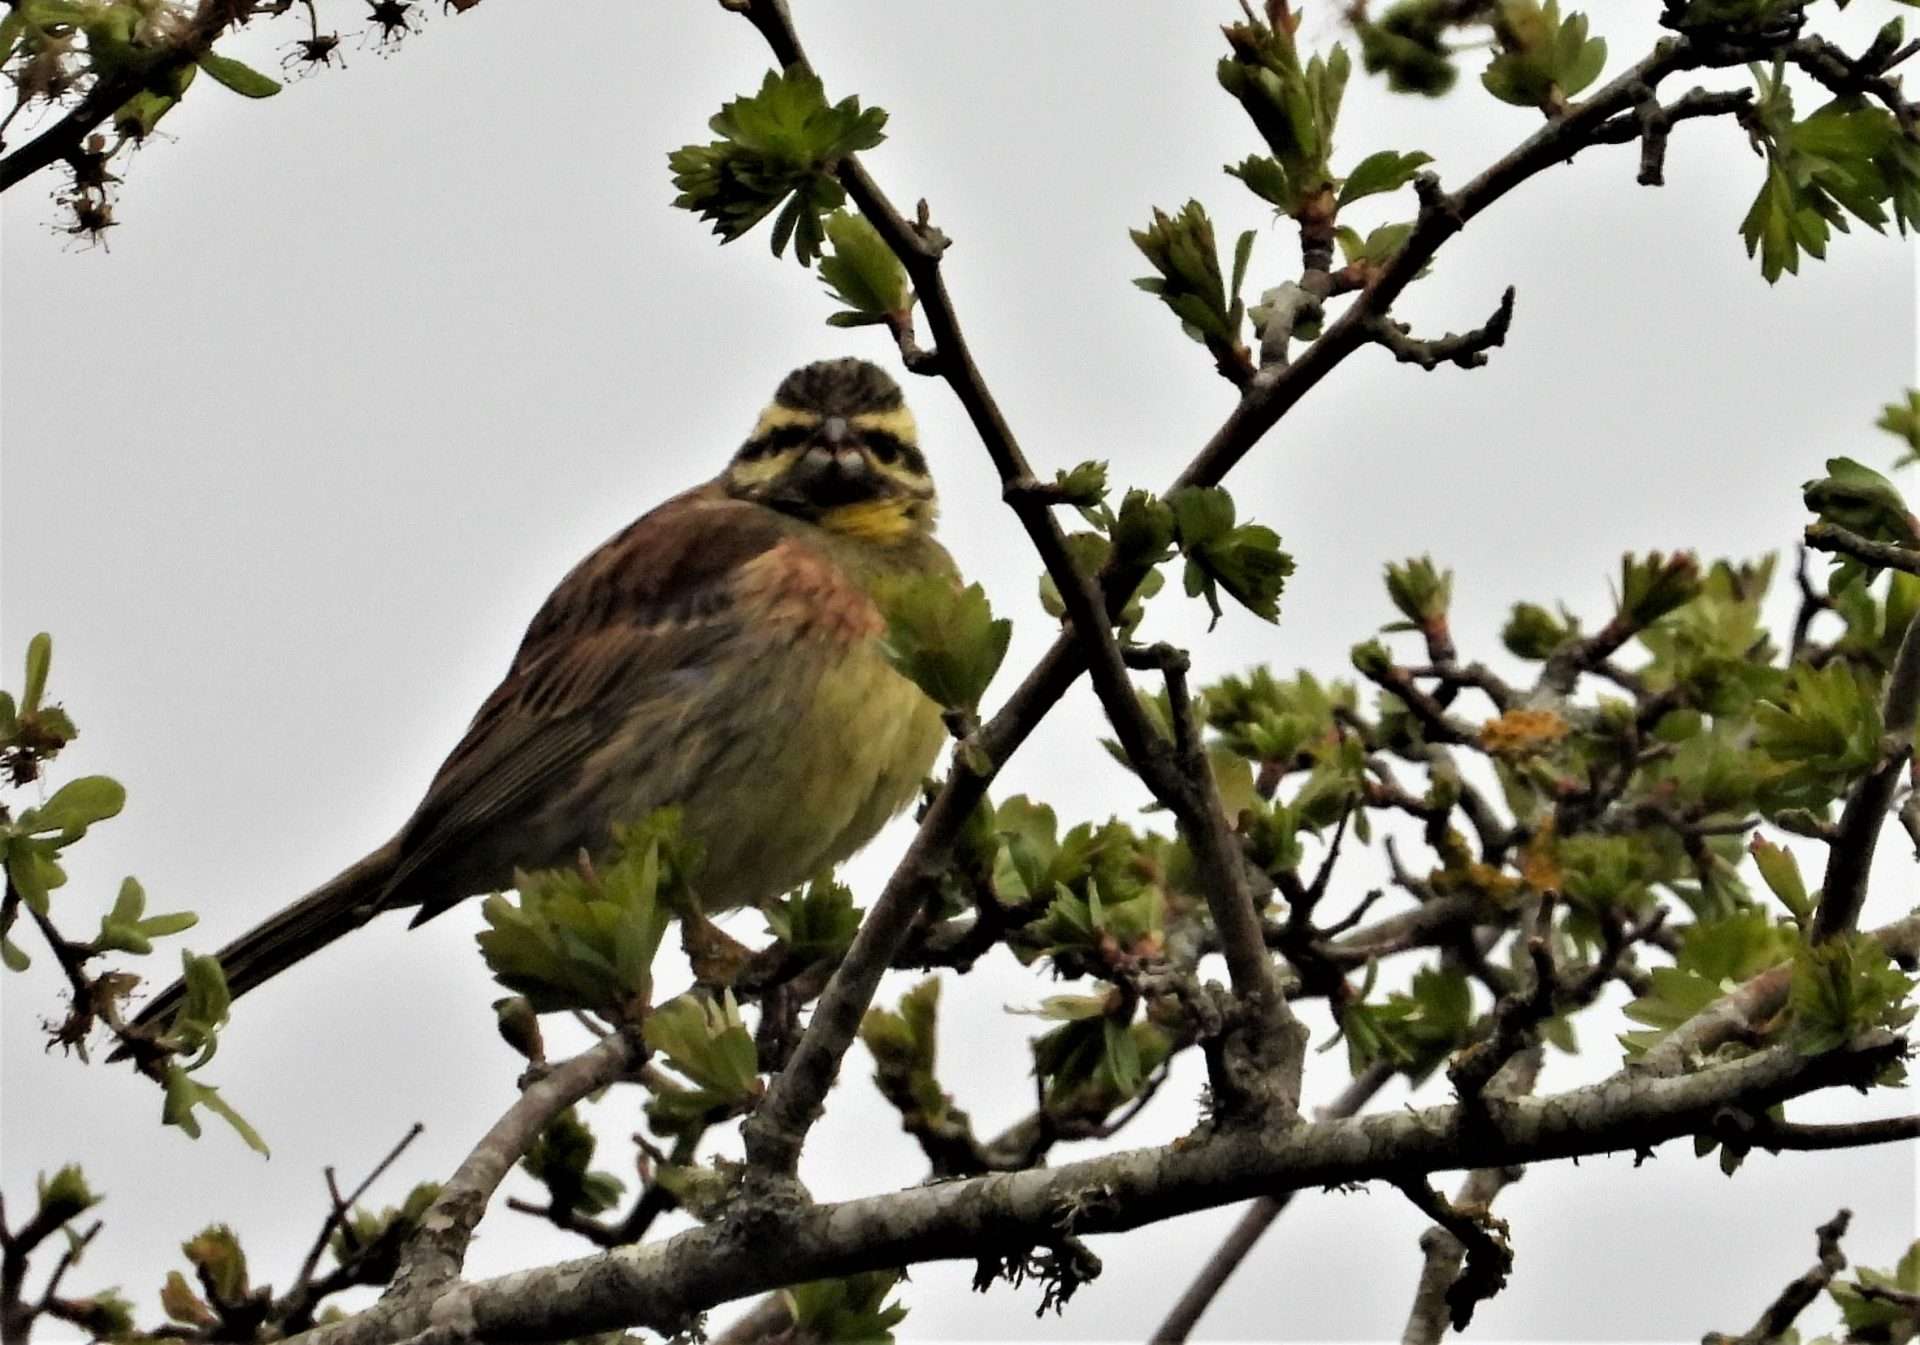 Cirl Bunting by Kenneth Bradley at Haccombe